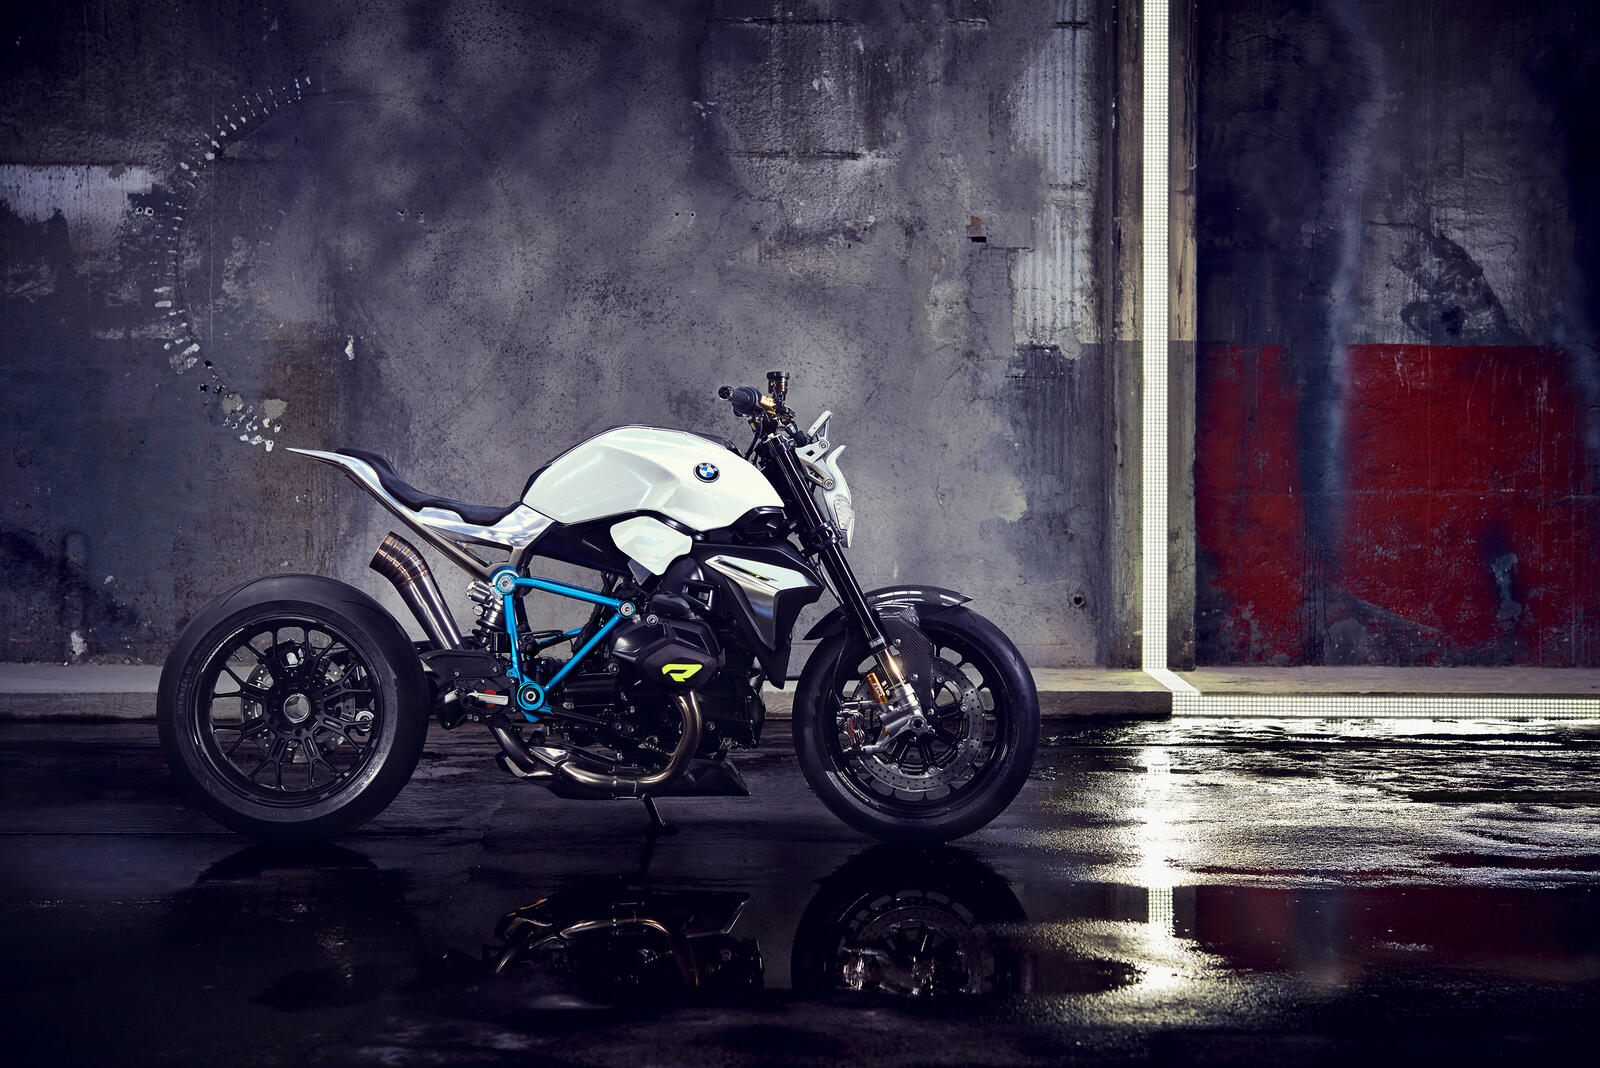 Wallpapers BMW motorcycles Behance on the desktop